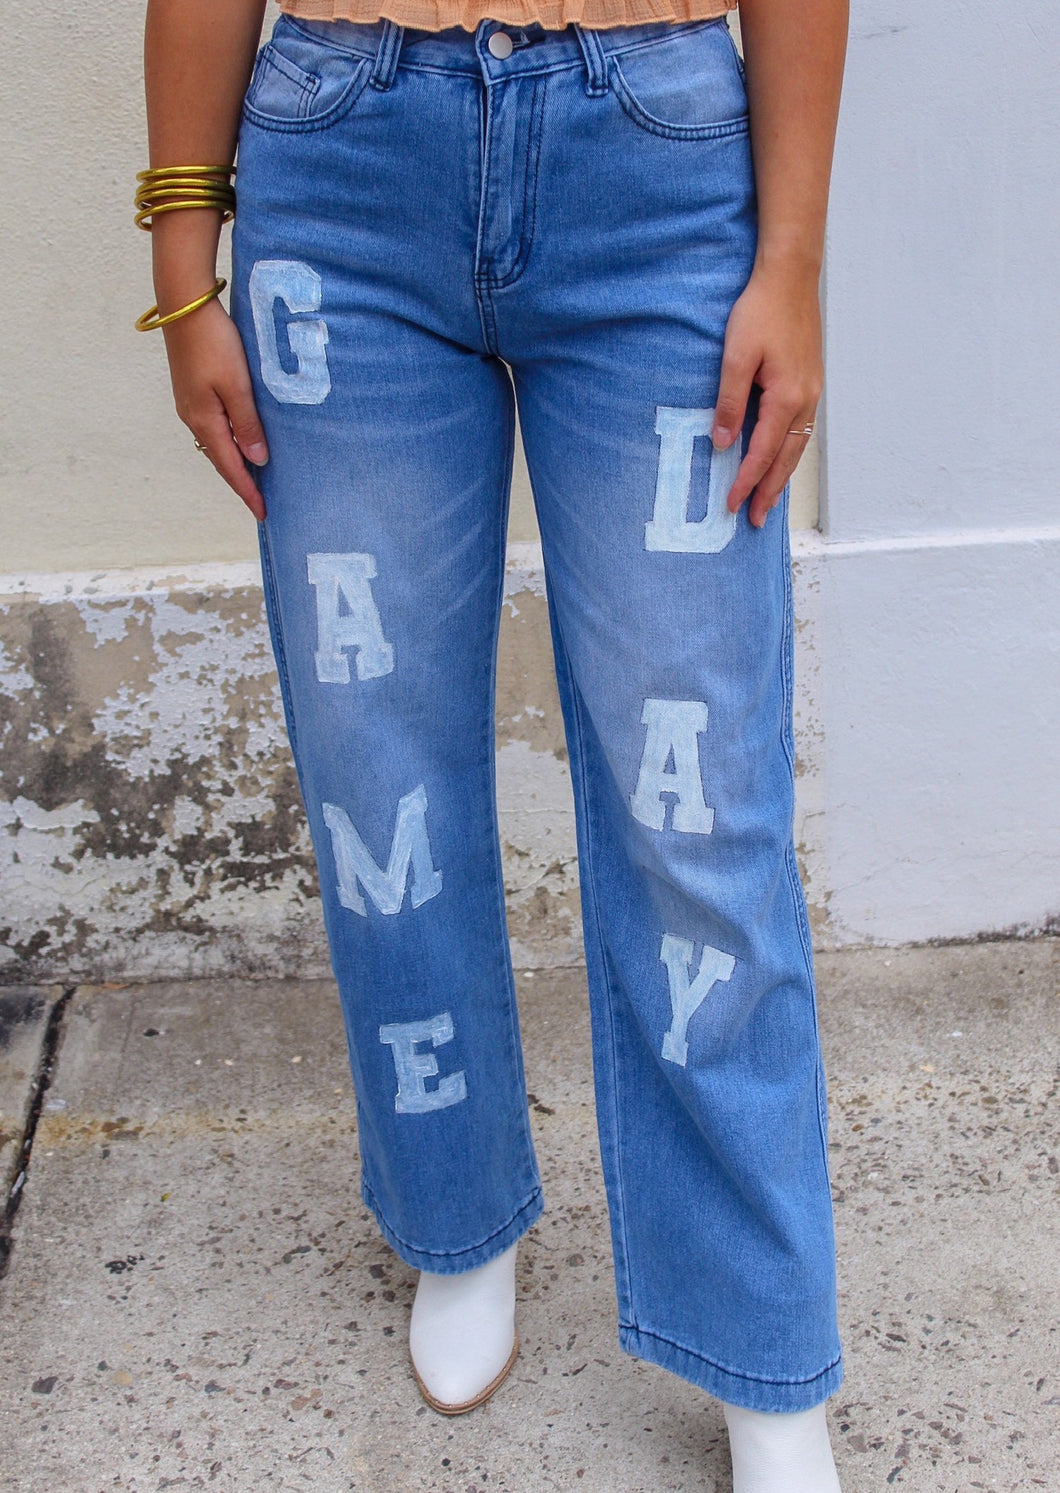 Isabelle Renee Art x GB- Gameday Football Jeans